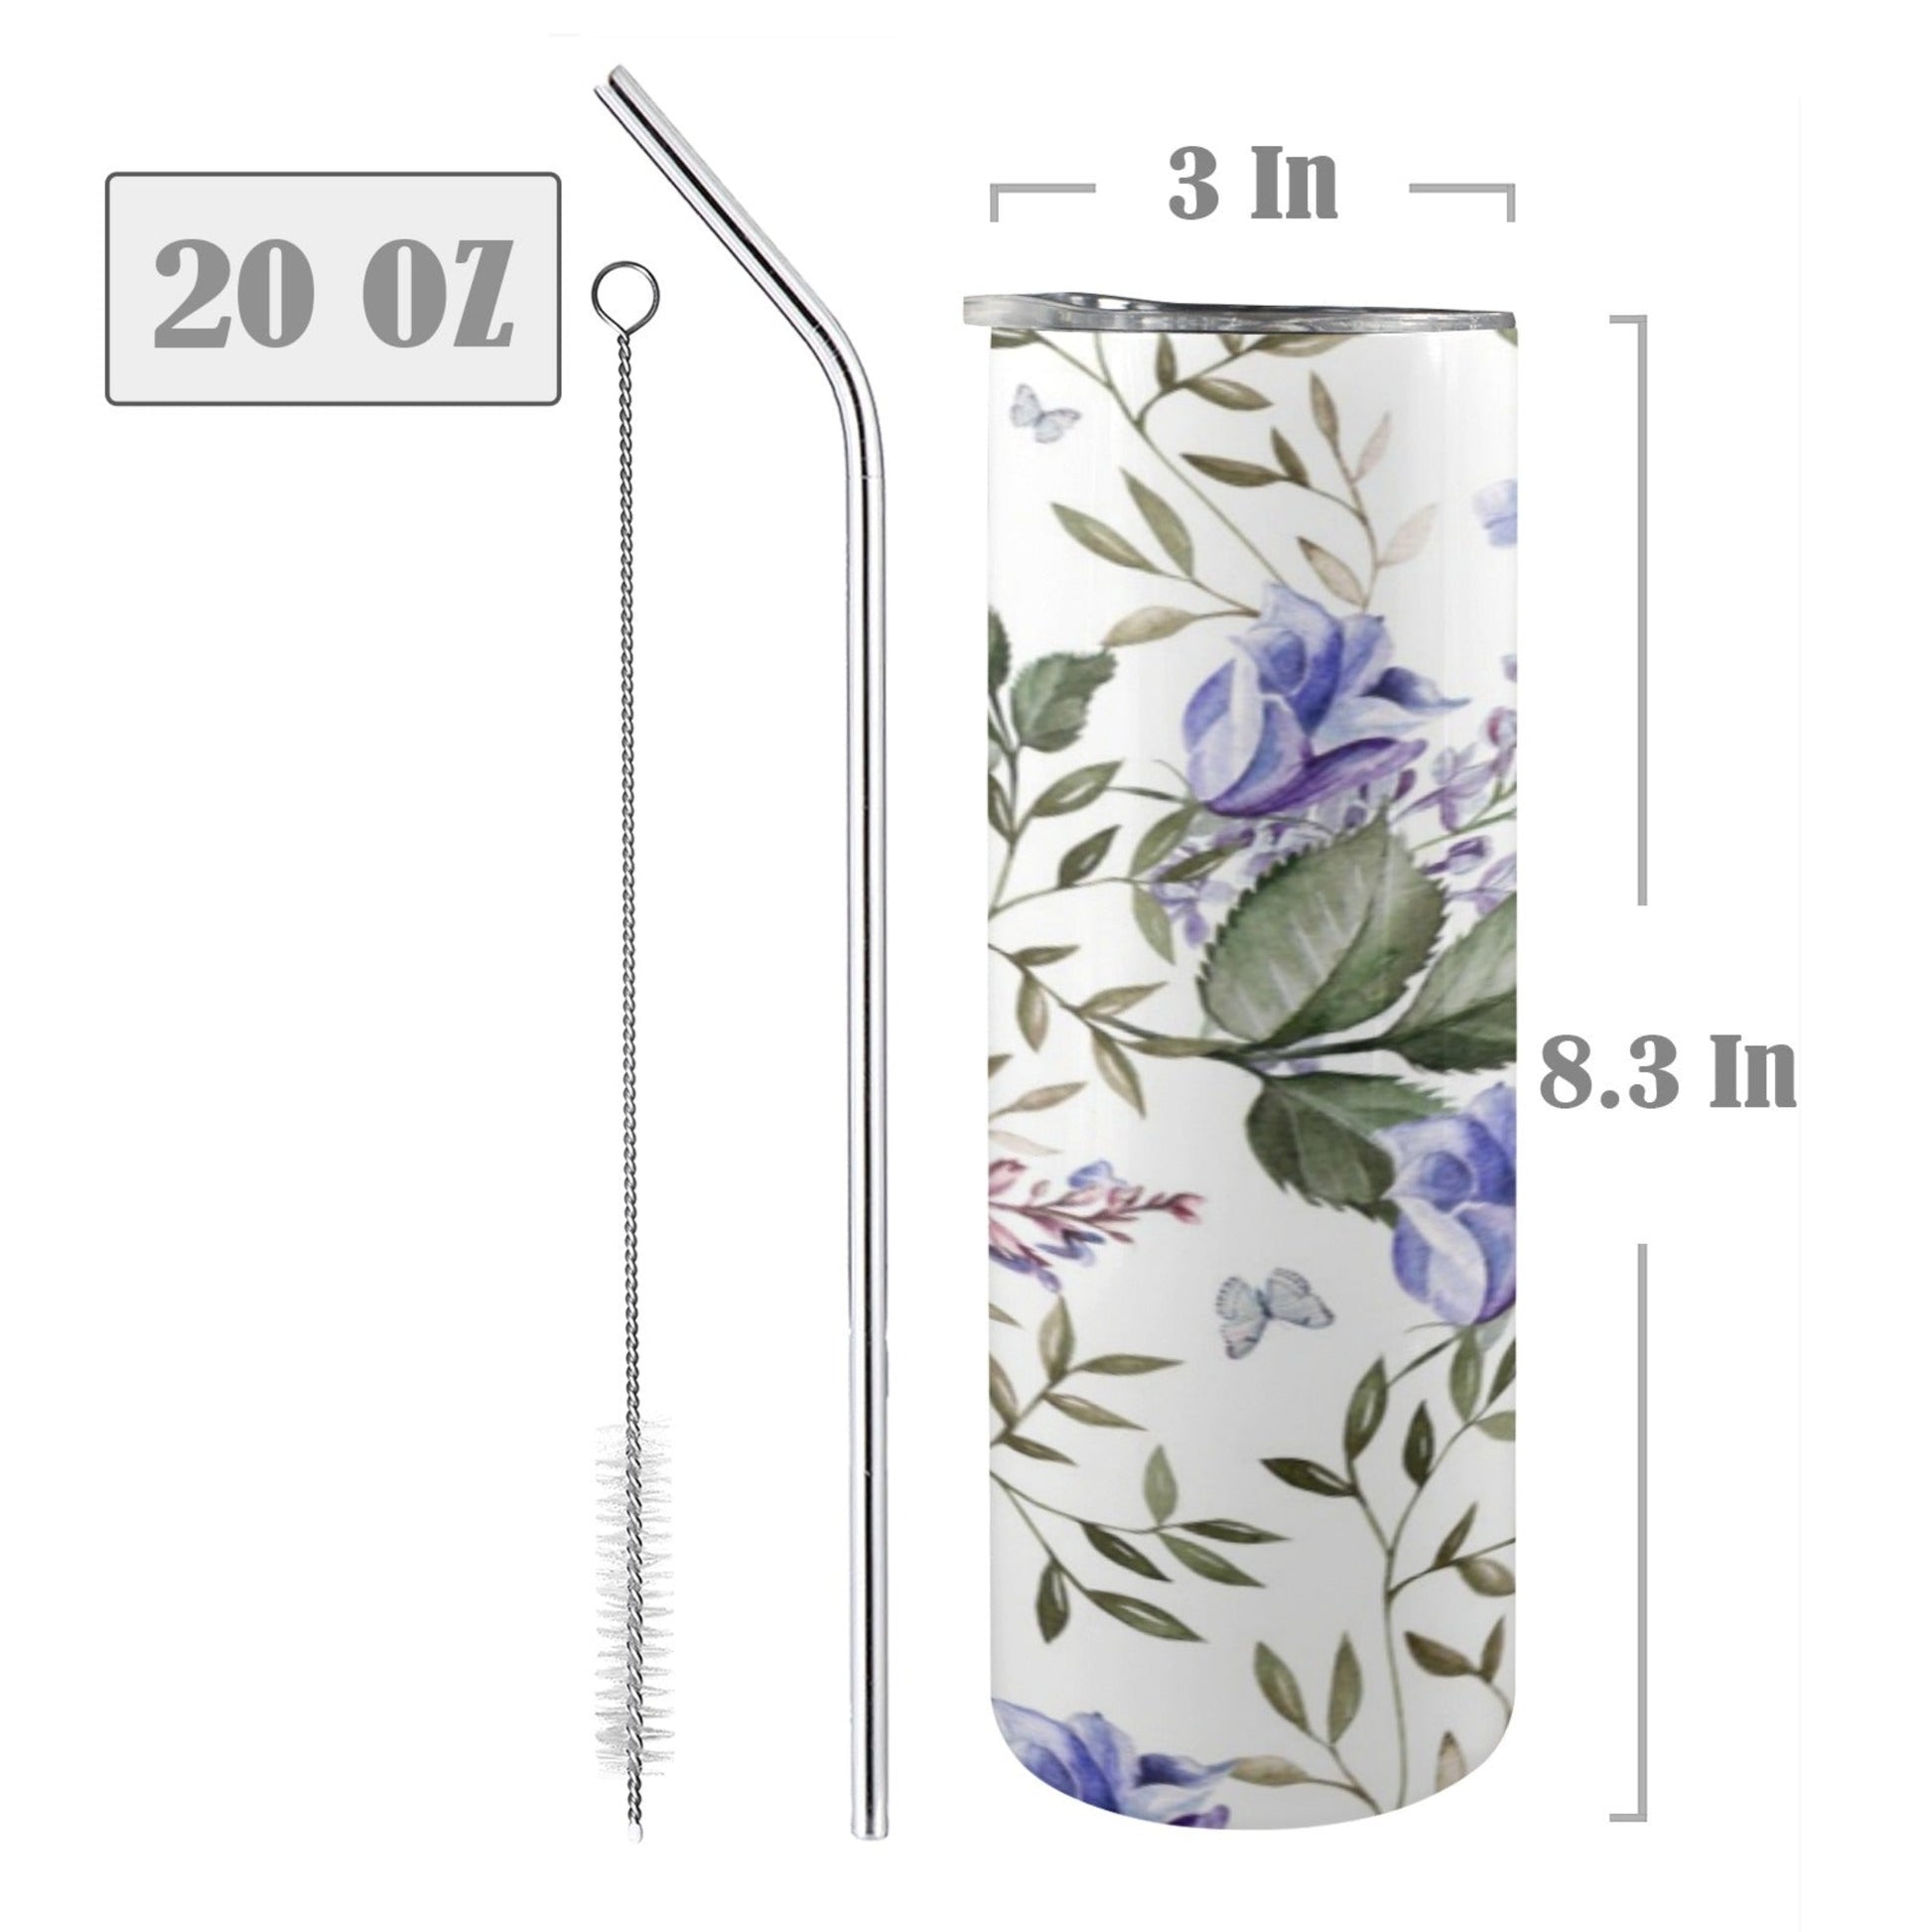 Blue Flowers - 20oz Tall Skinny Tumbler with Lid and Straw 20oz Tall Skinny Tumbler with Lid and Straw